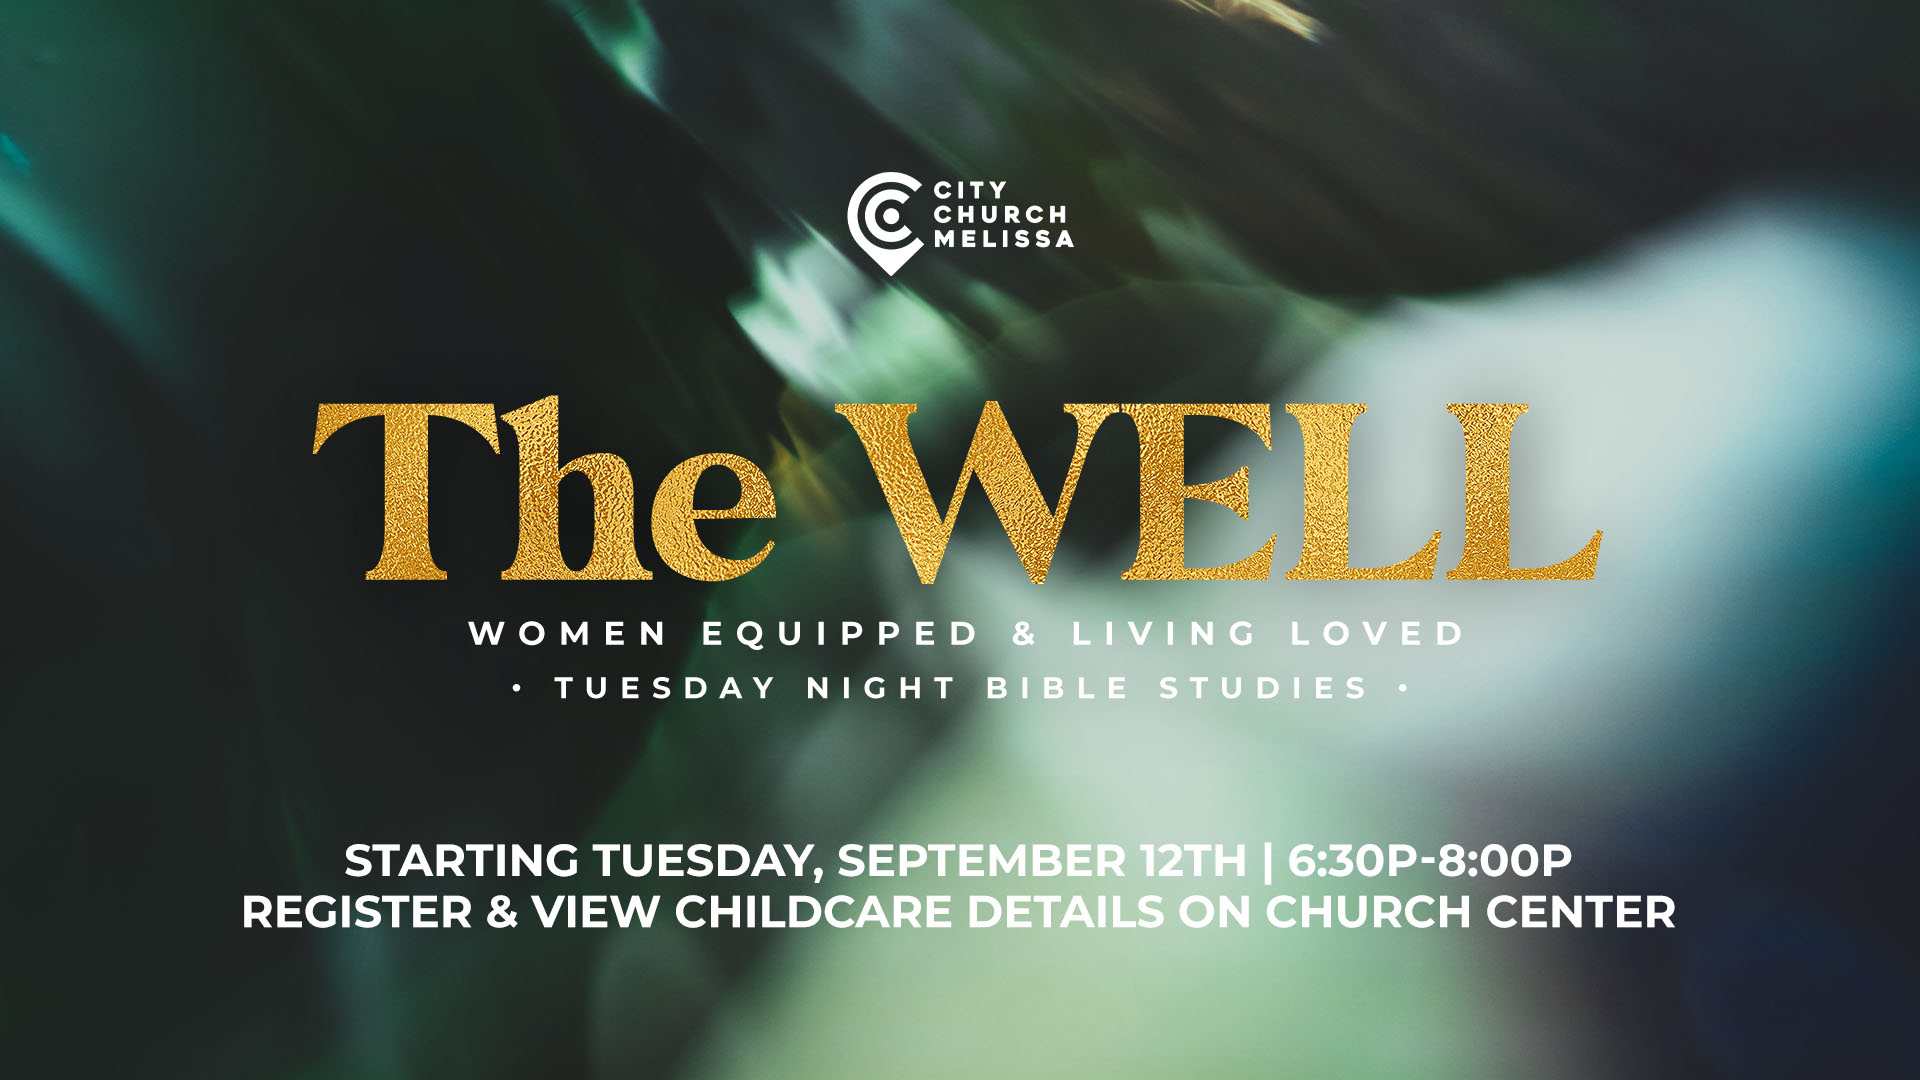 Come to the WELL (Ladies Tuesday Night Bible Study), kicking off September 12th! The WELL stands for Women Equipped and Living Loved. We are diving into community this semester by coming together every Tuesday night from 6:30p-8:00p for worship, Bible Study, and fellowship. <a href="https://citychurchmelissa.churchcenter.com/registrations/events/1876345">REGISTER HERE</A>